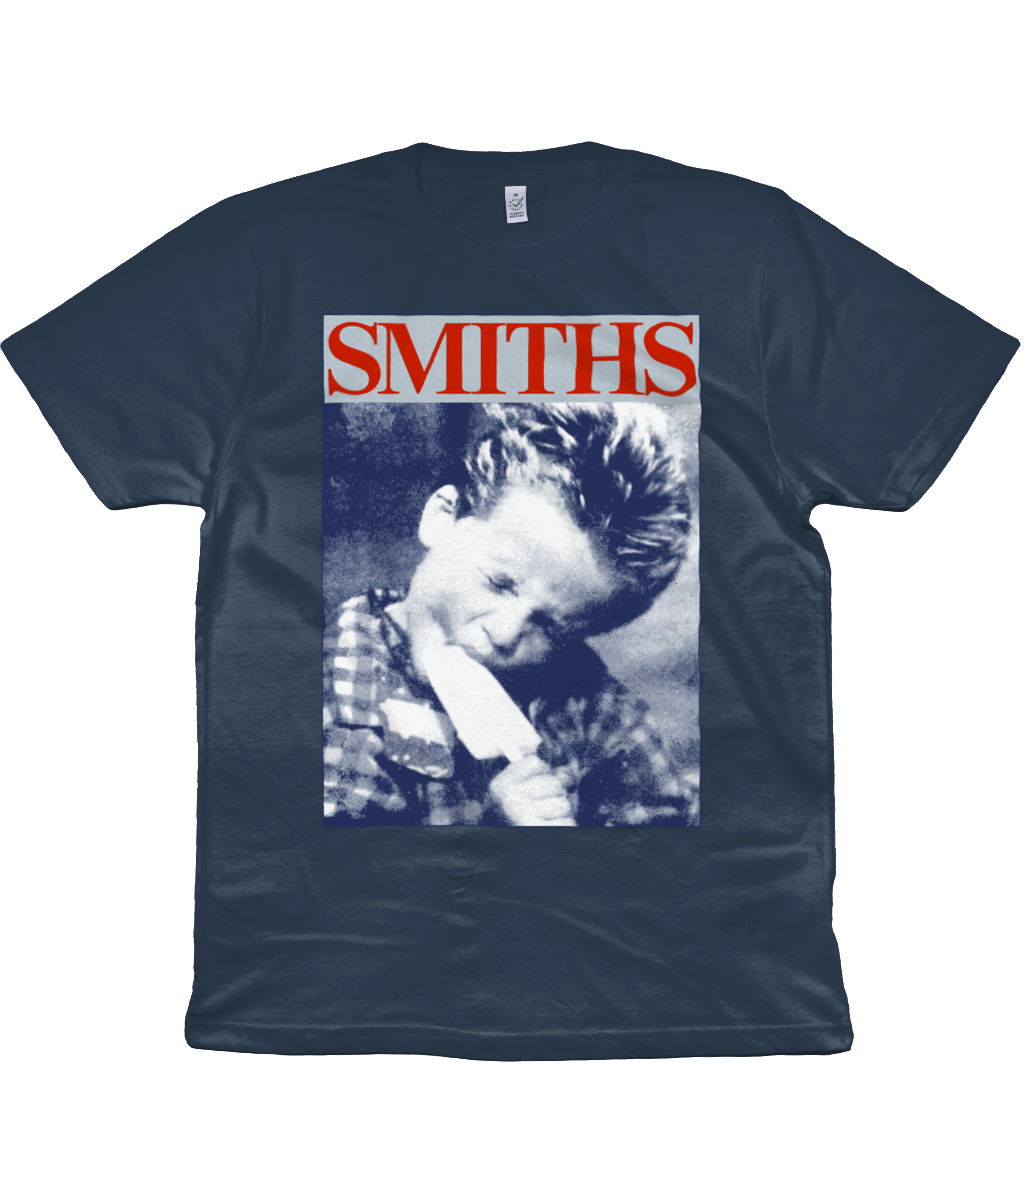 THE SMITHS - 'Boy With Lolly' - 1986 - Dark Blue & Red - Vintage Print Size